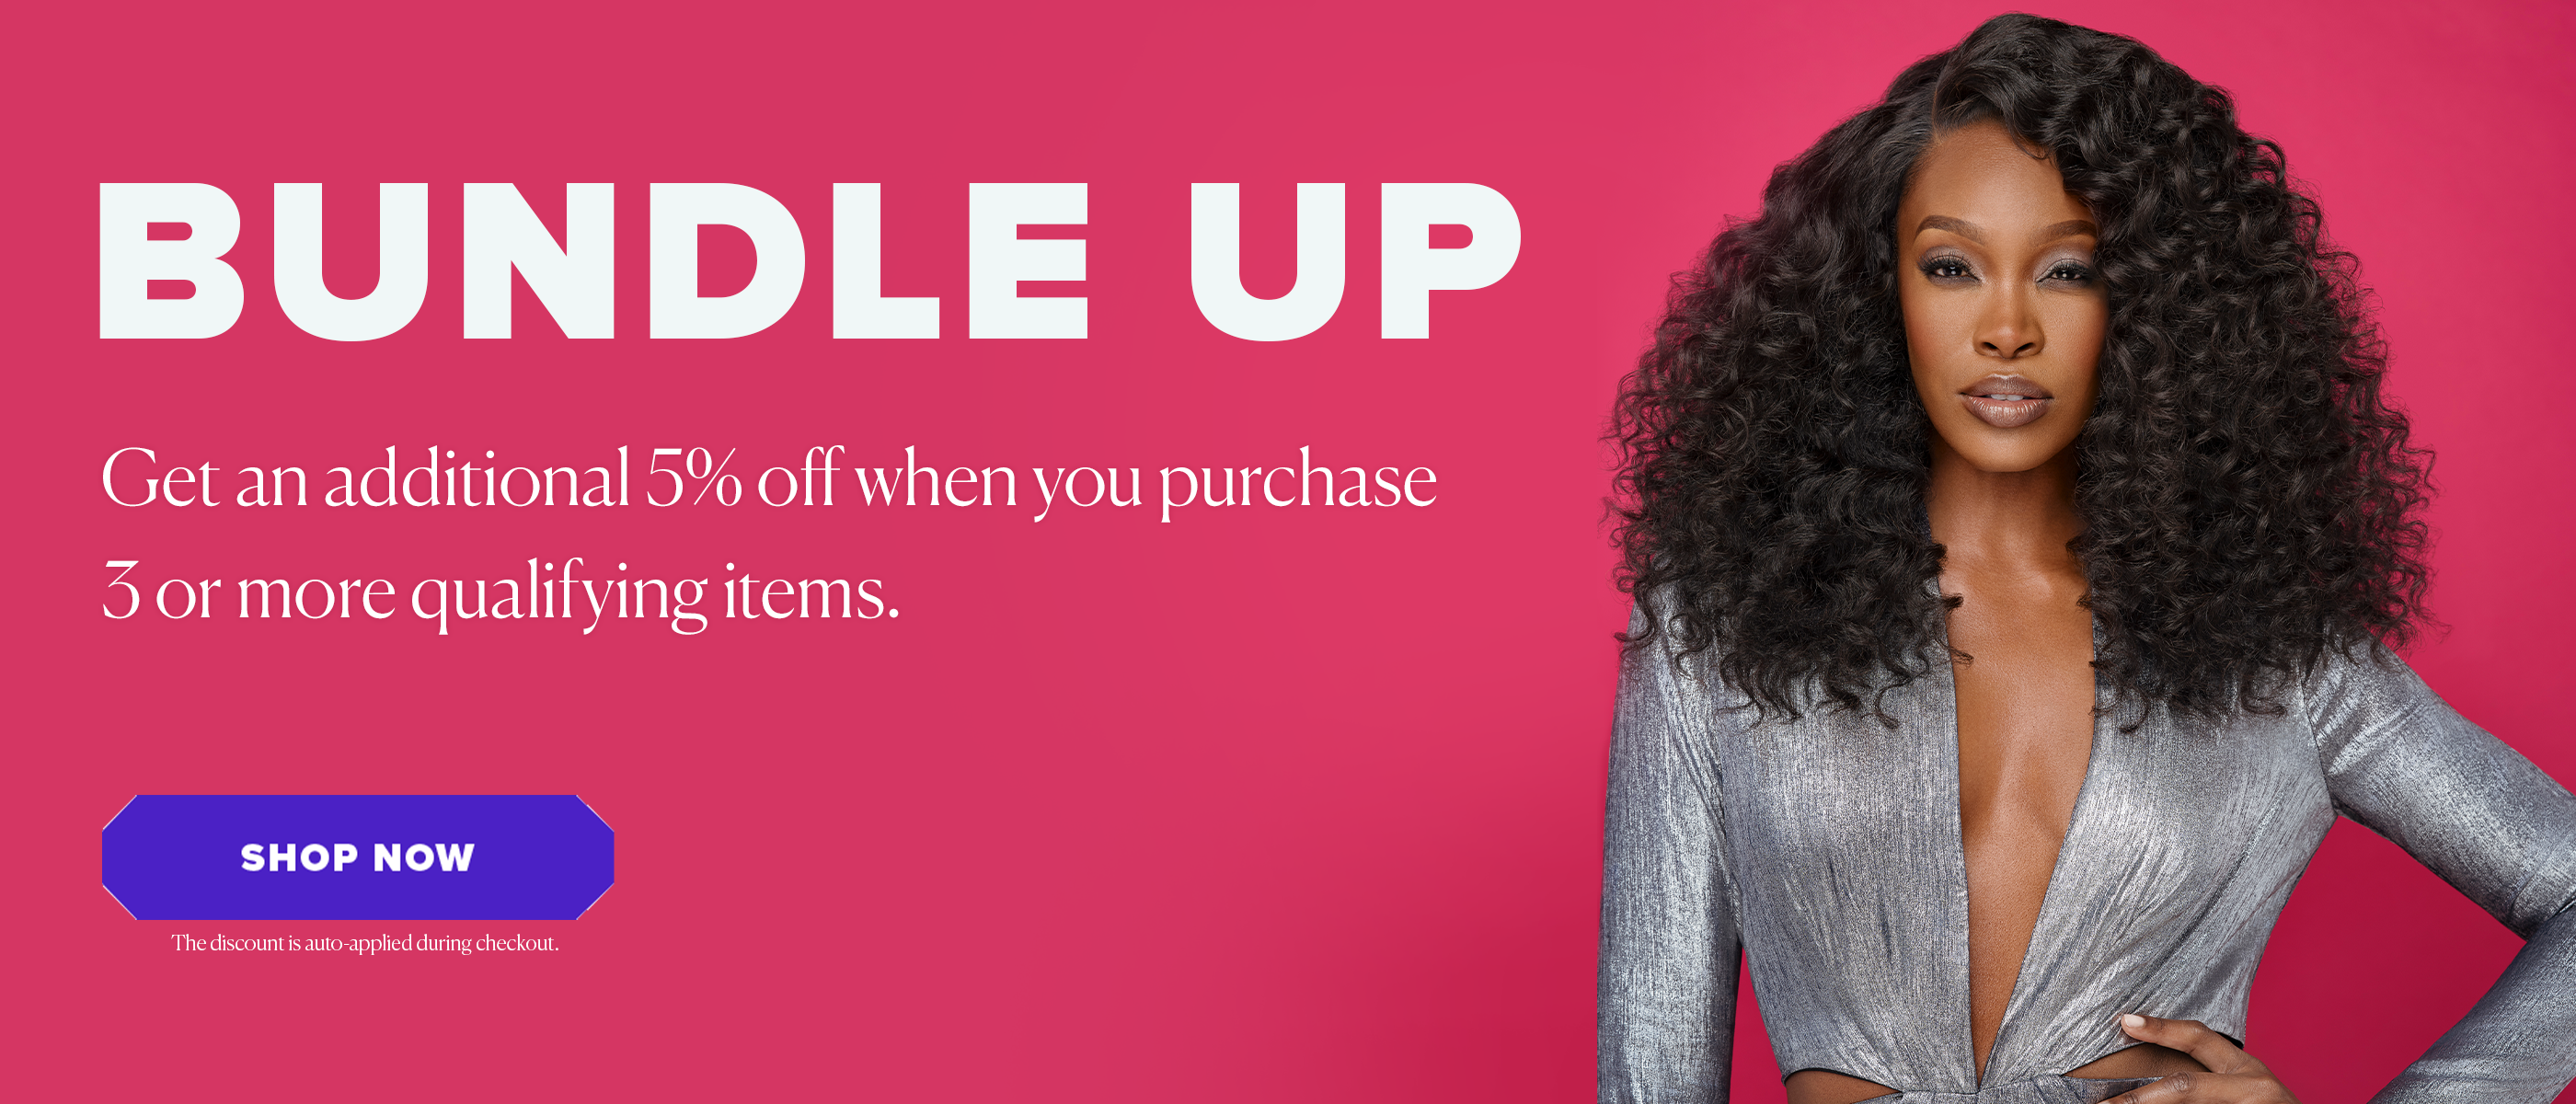 Get an additional 5% off when you purchase 3 or more qualifying items. 